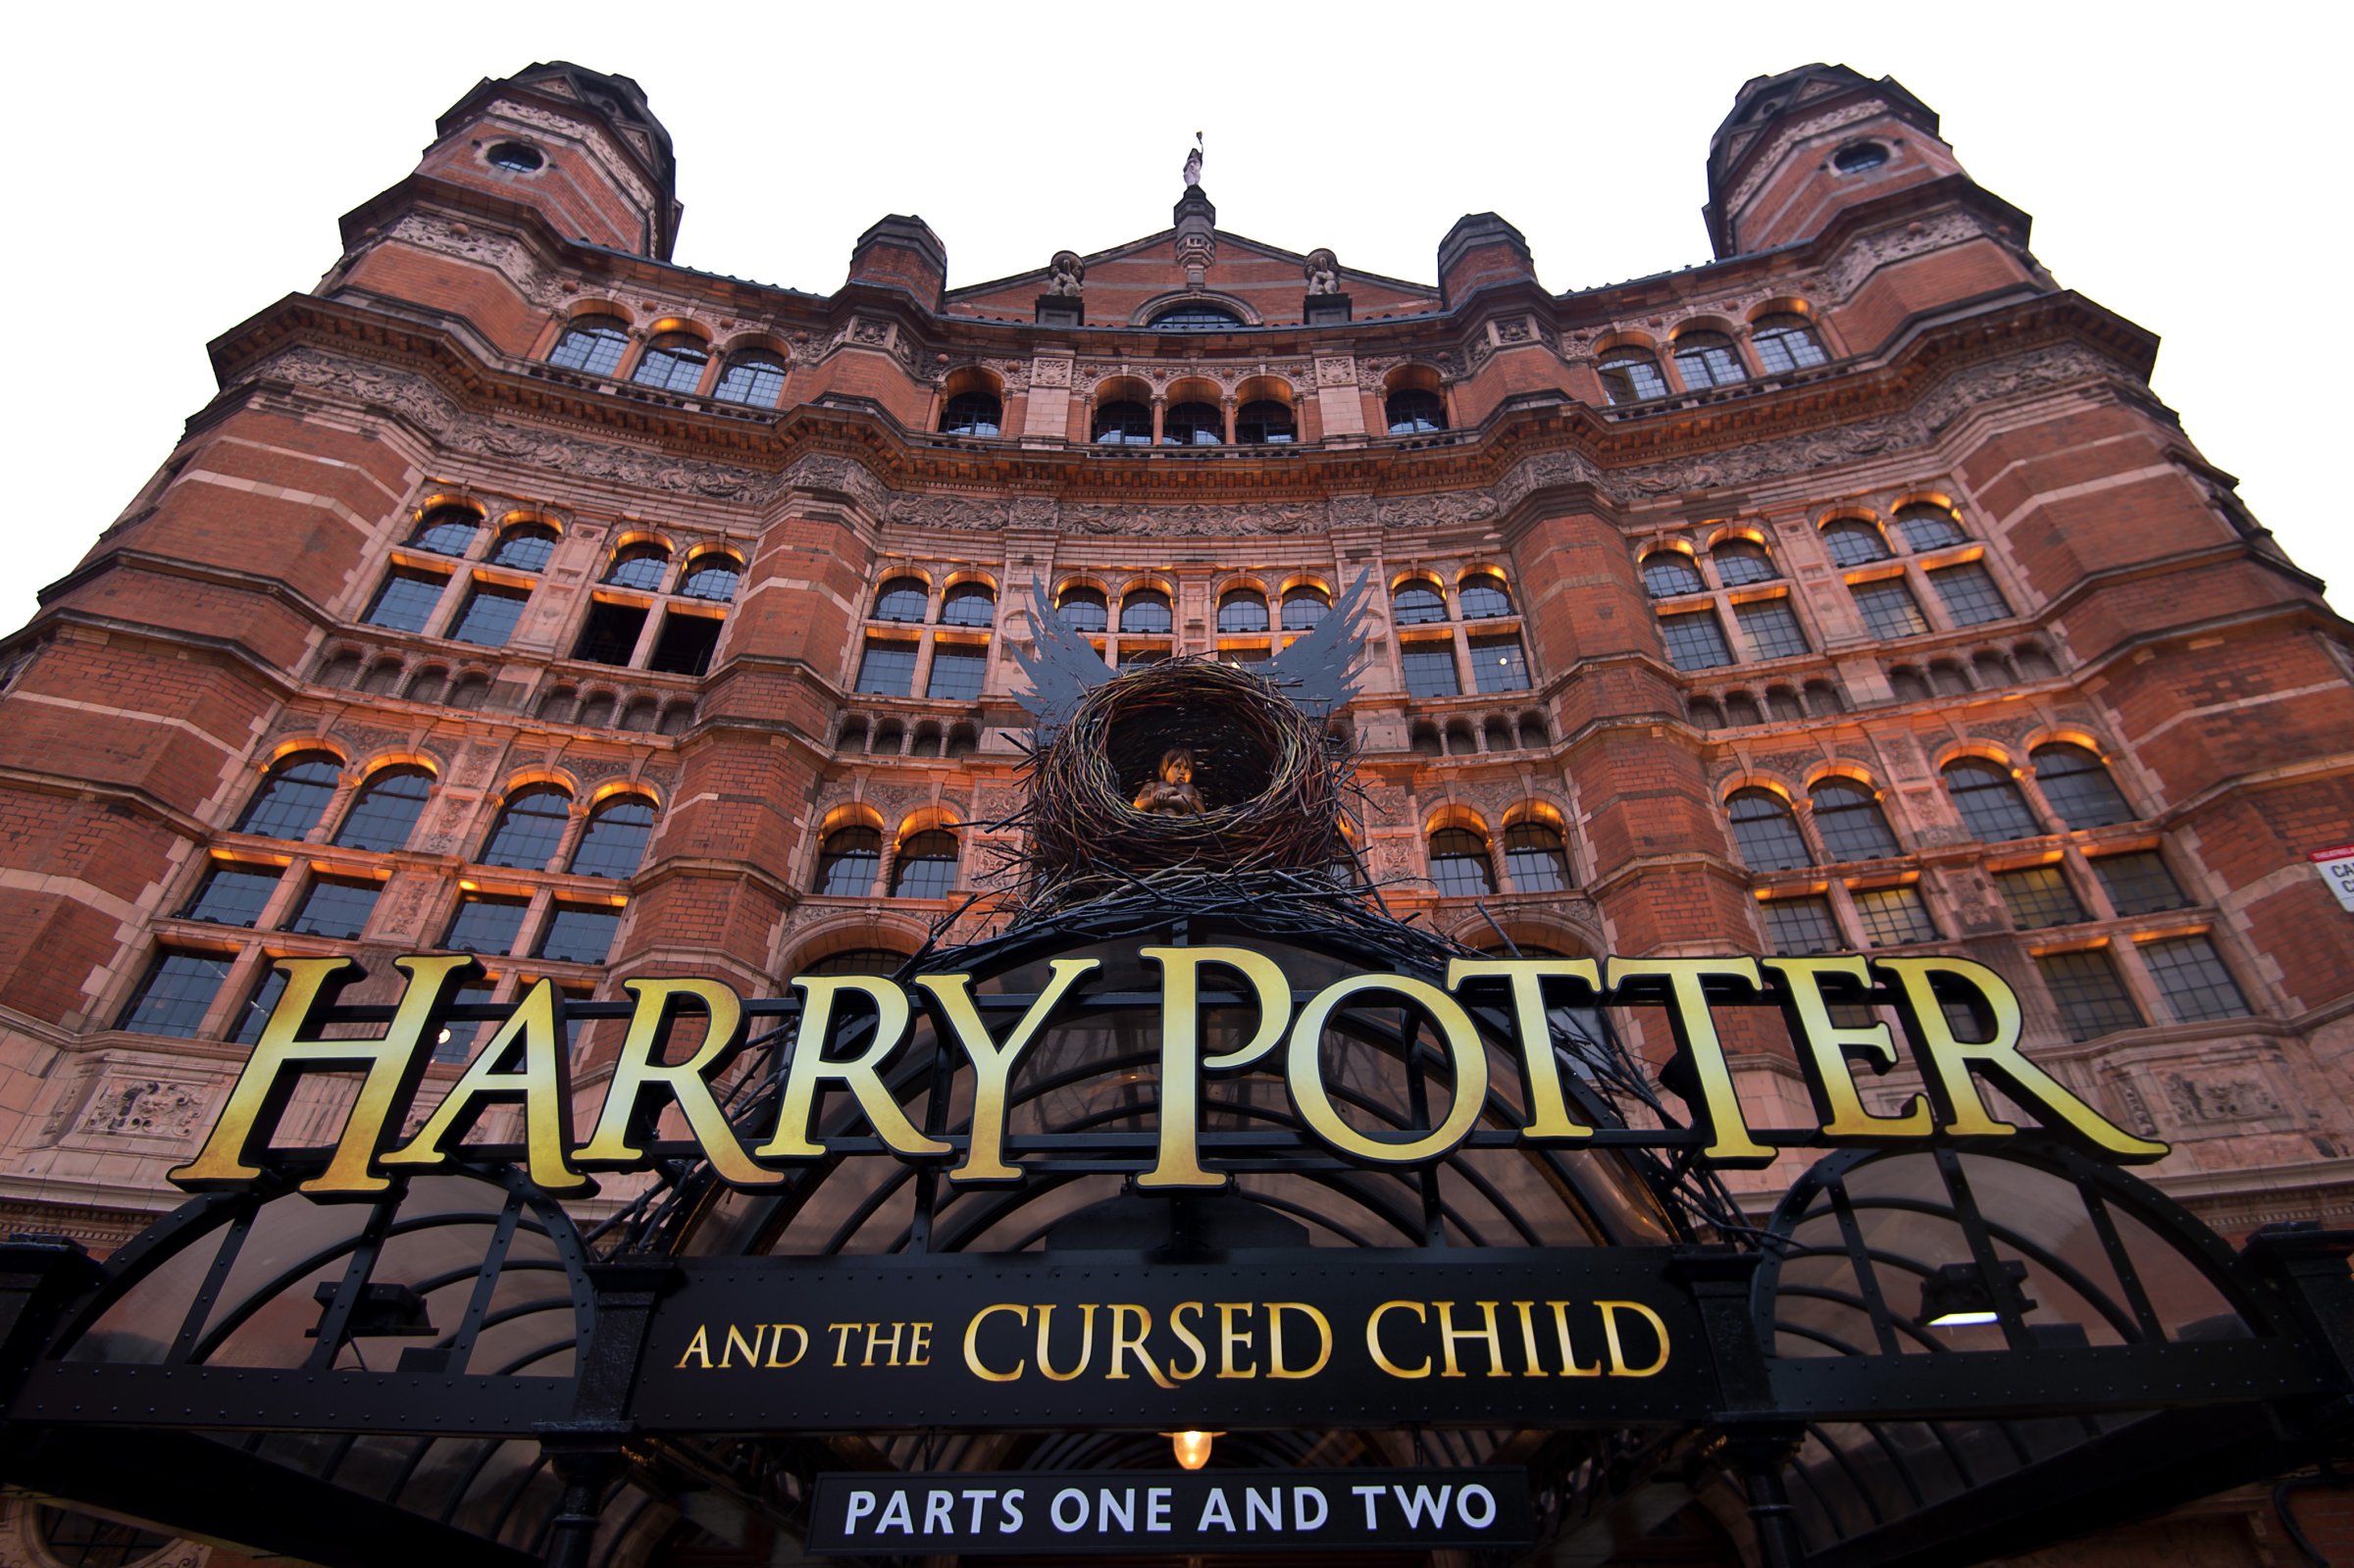 Previews Start For "Harry Potter and the Cursed Child"